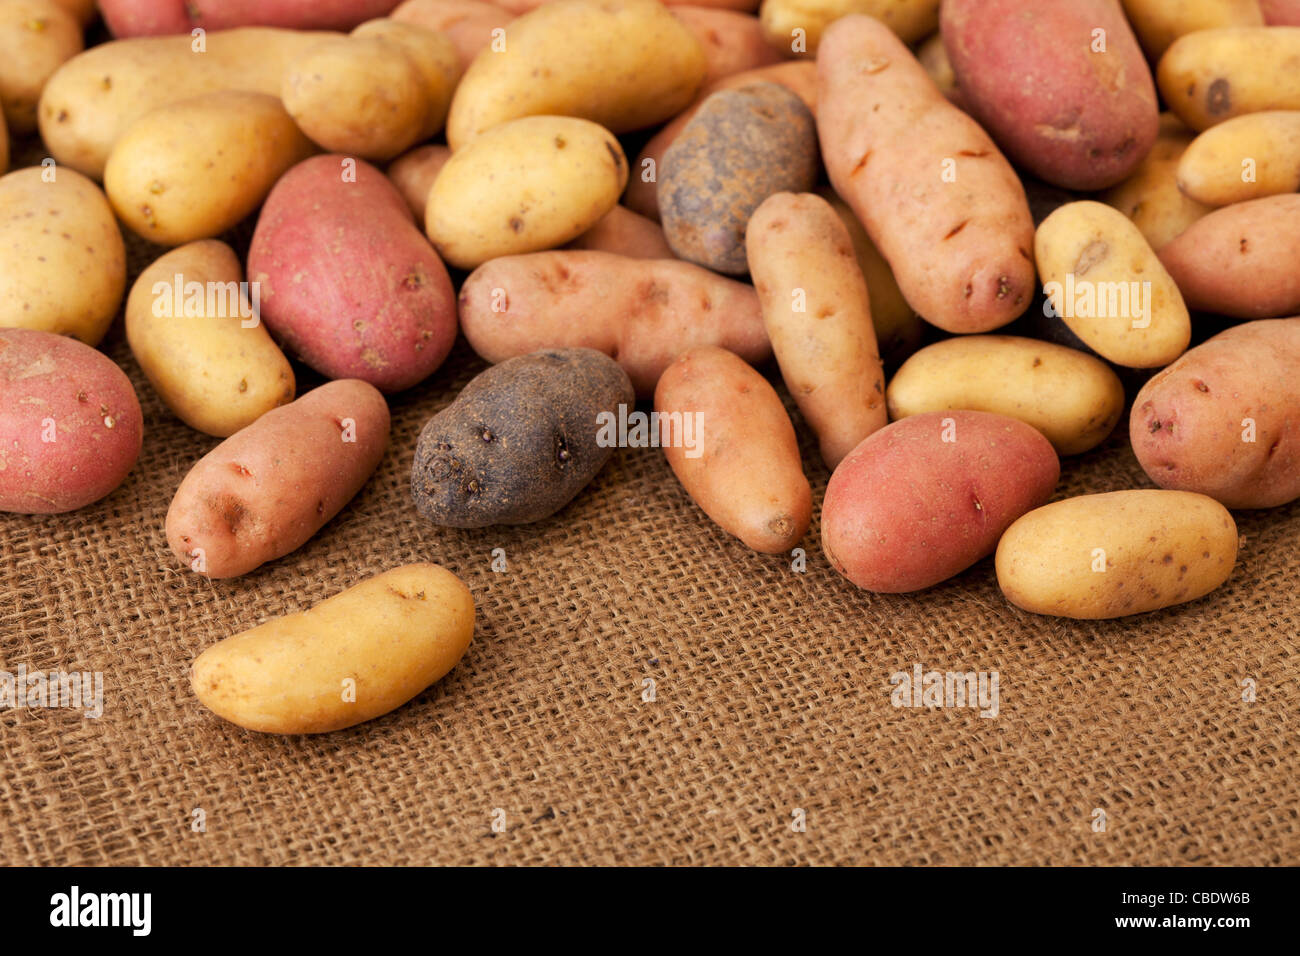 a variety of small, elongated fingerling potato organically grown in Colorado against burlap background, shallow depth of focus Stock Photo